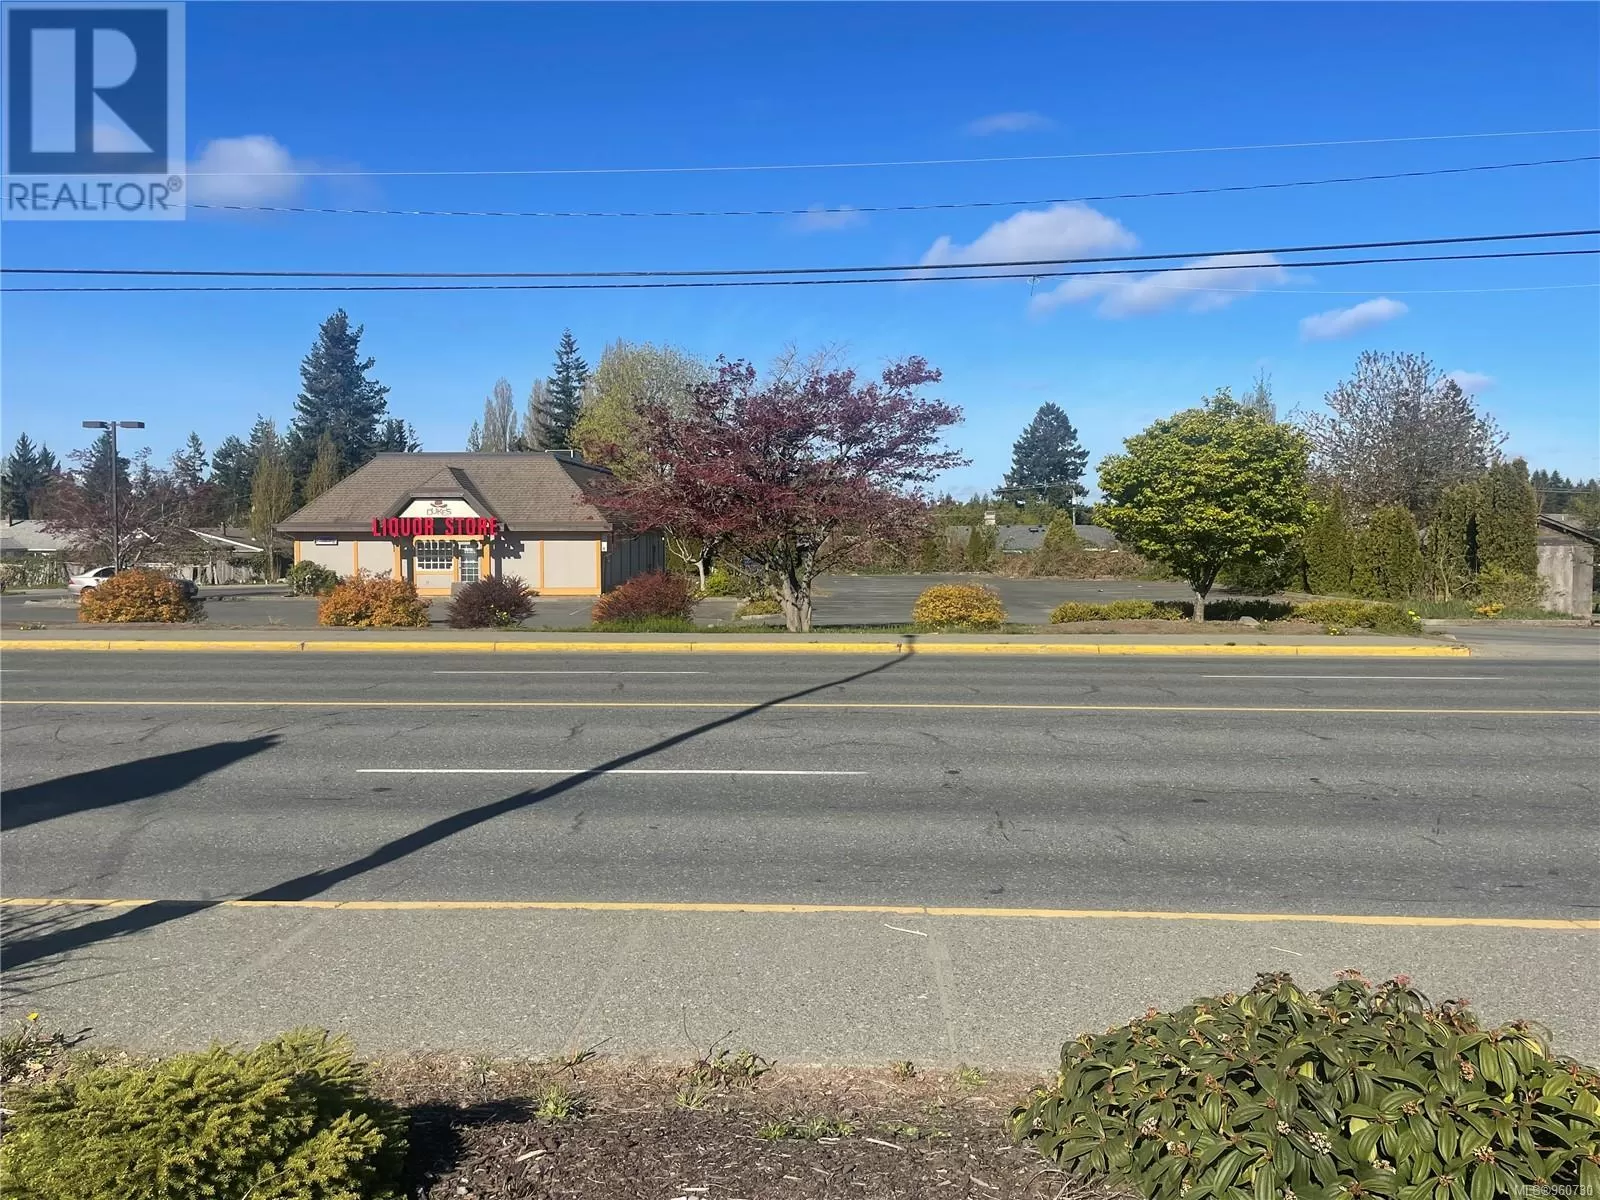 Commercial Mix for rent: 106 Dogwood St, Campbell River, British Columbia V9W 2X7